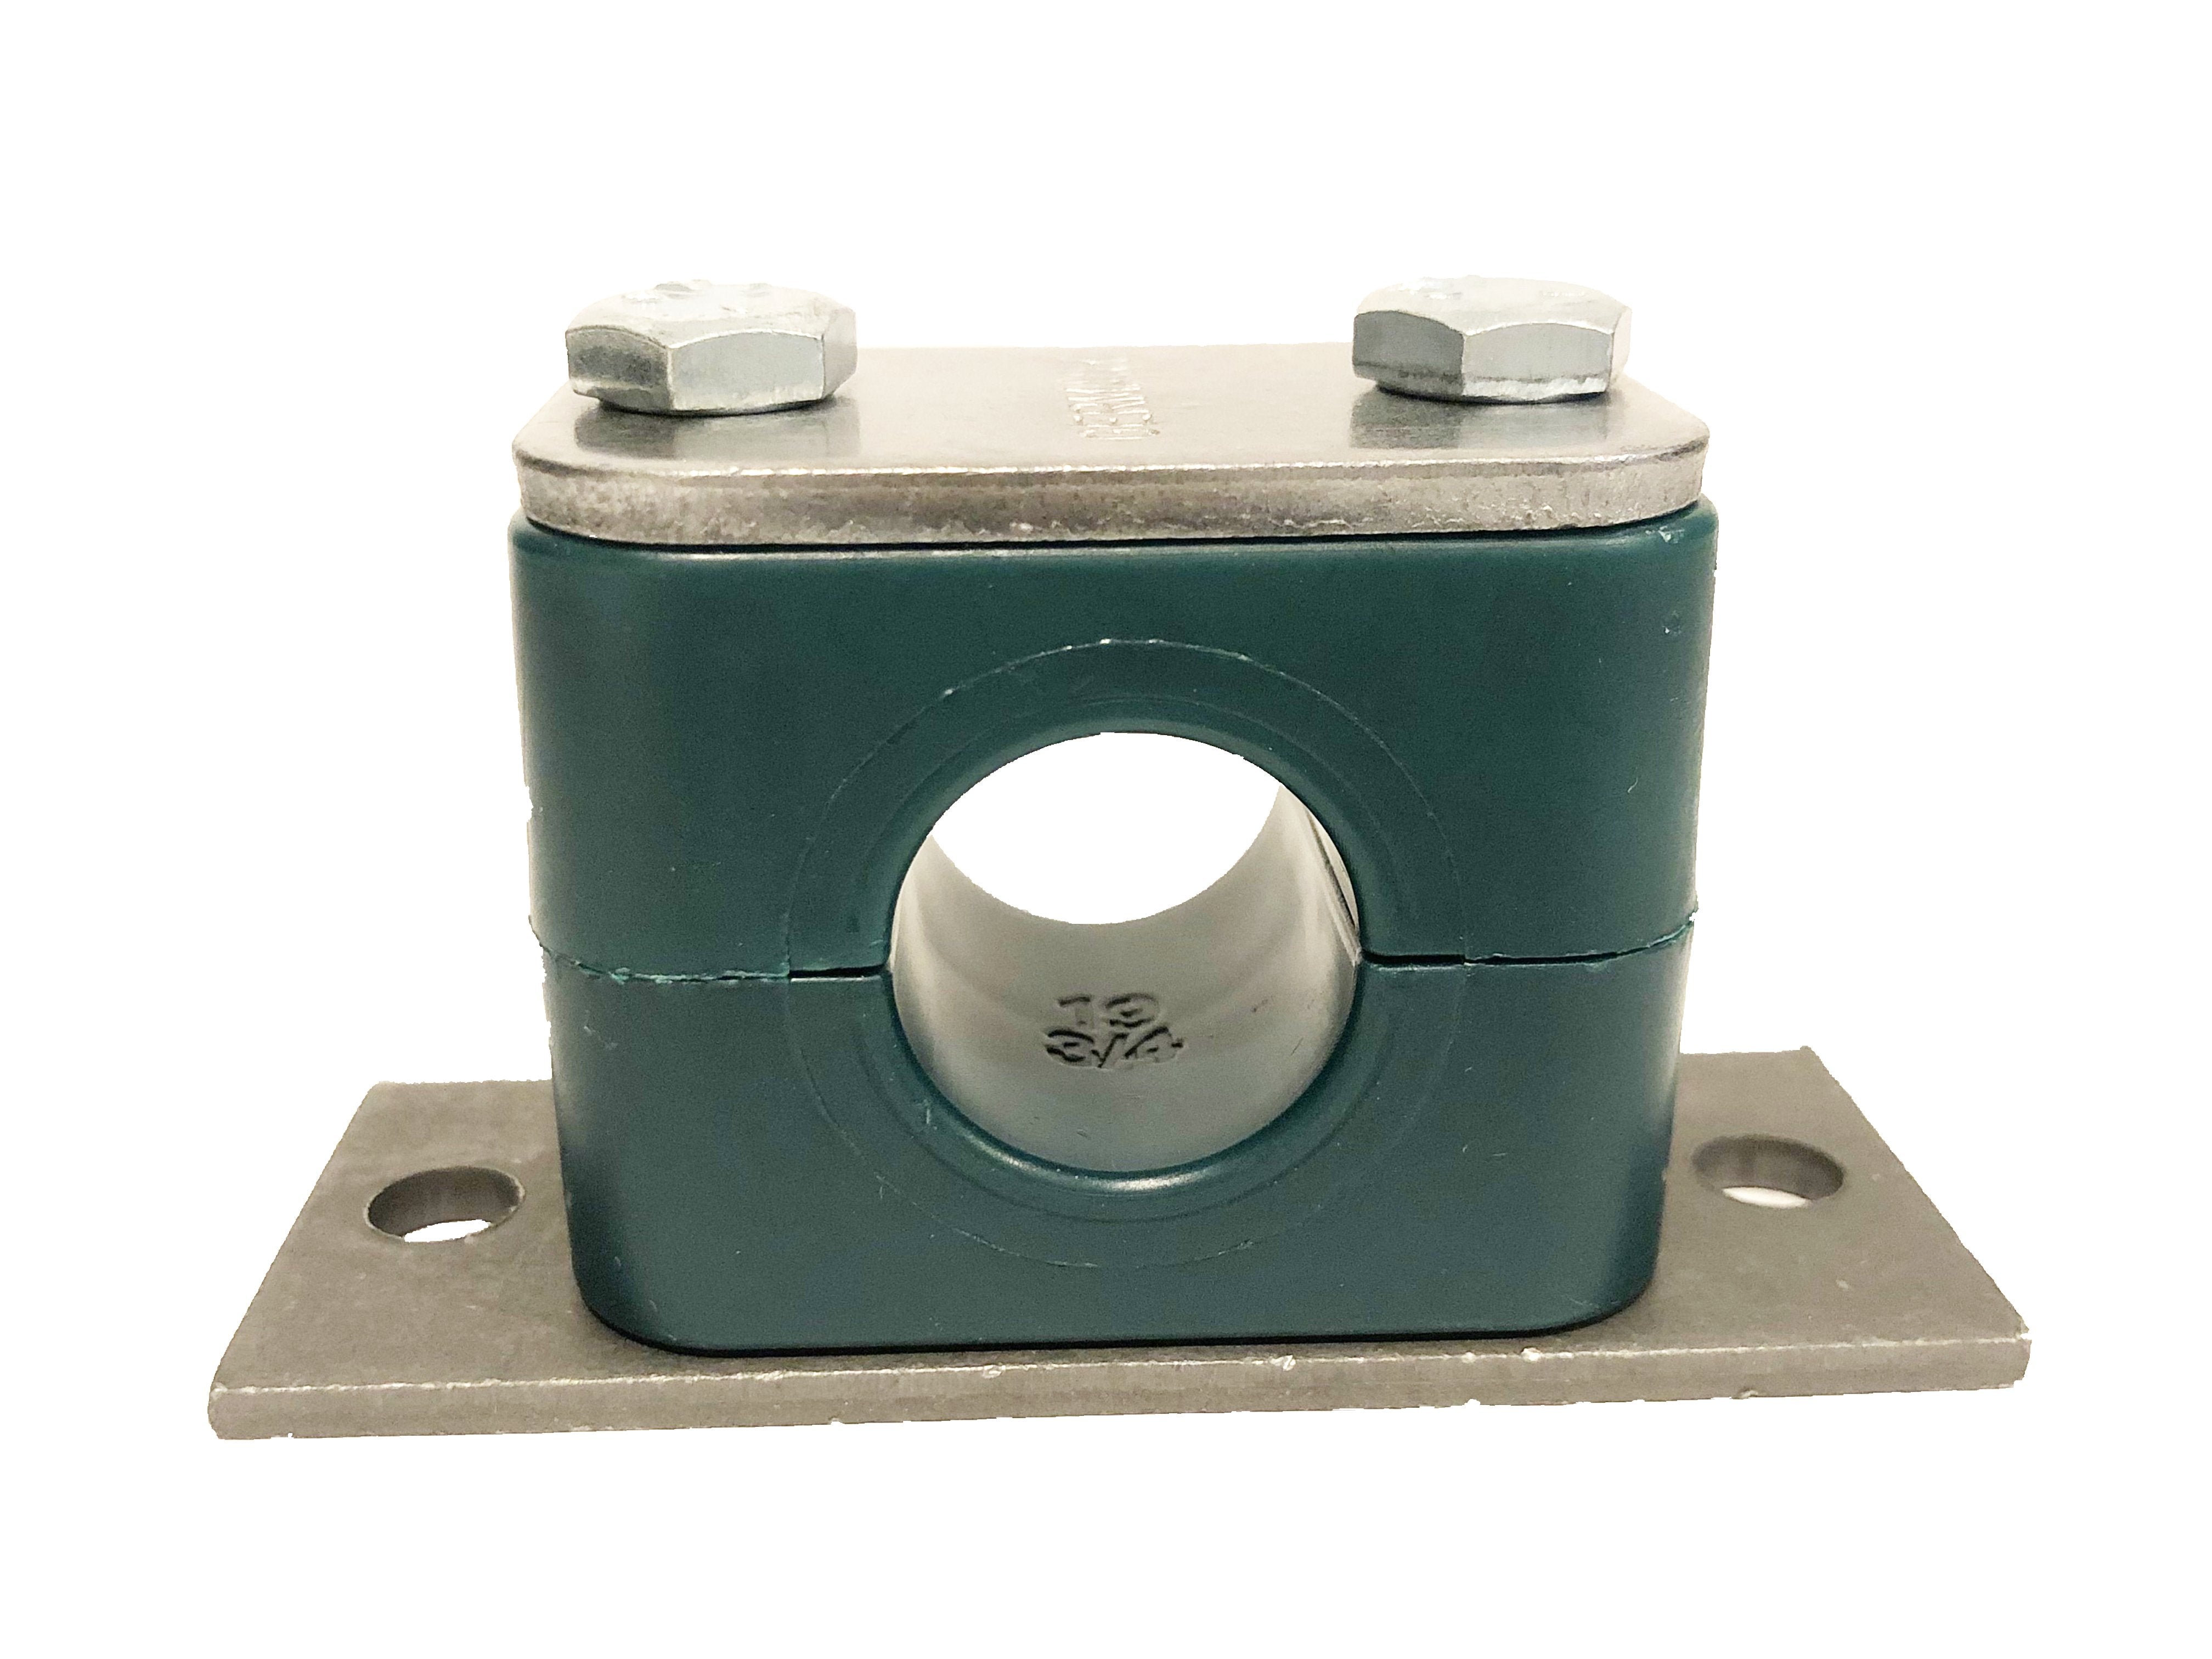 SPV-213.5-PP-H-DP-AS-U-W10 : Stauff Clamp, Elongated Weld Plate, 0.53" (13.5mm) OD, for 1/4" Pipe, Green PP Insert, Smooth Interior, Carbon Steel